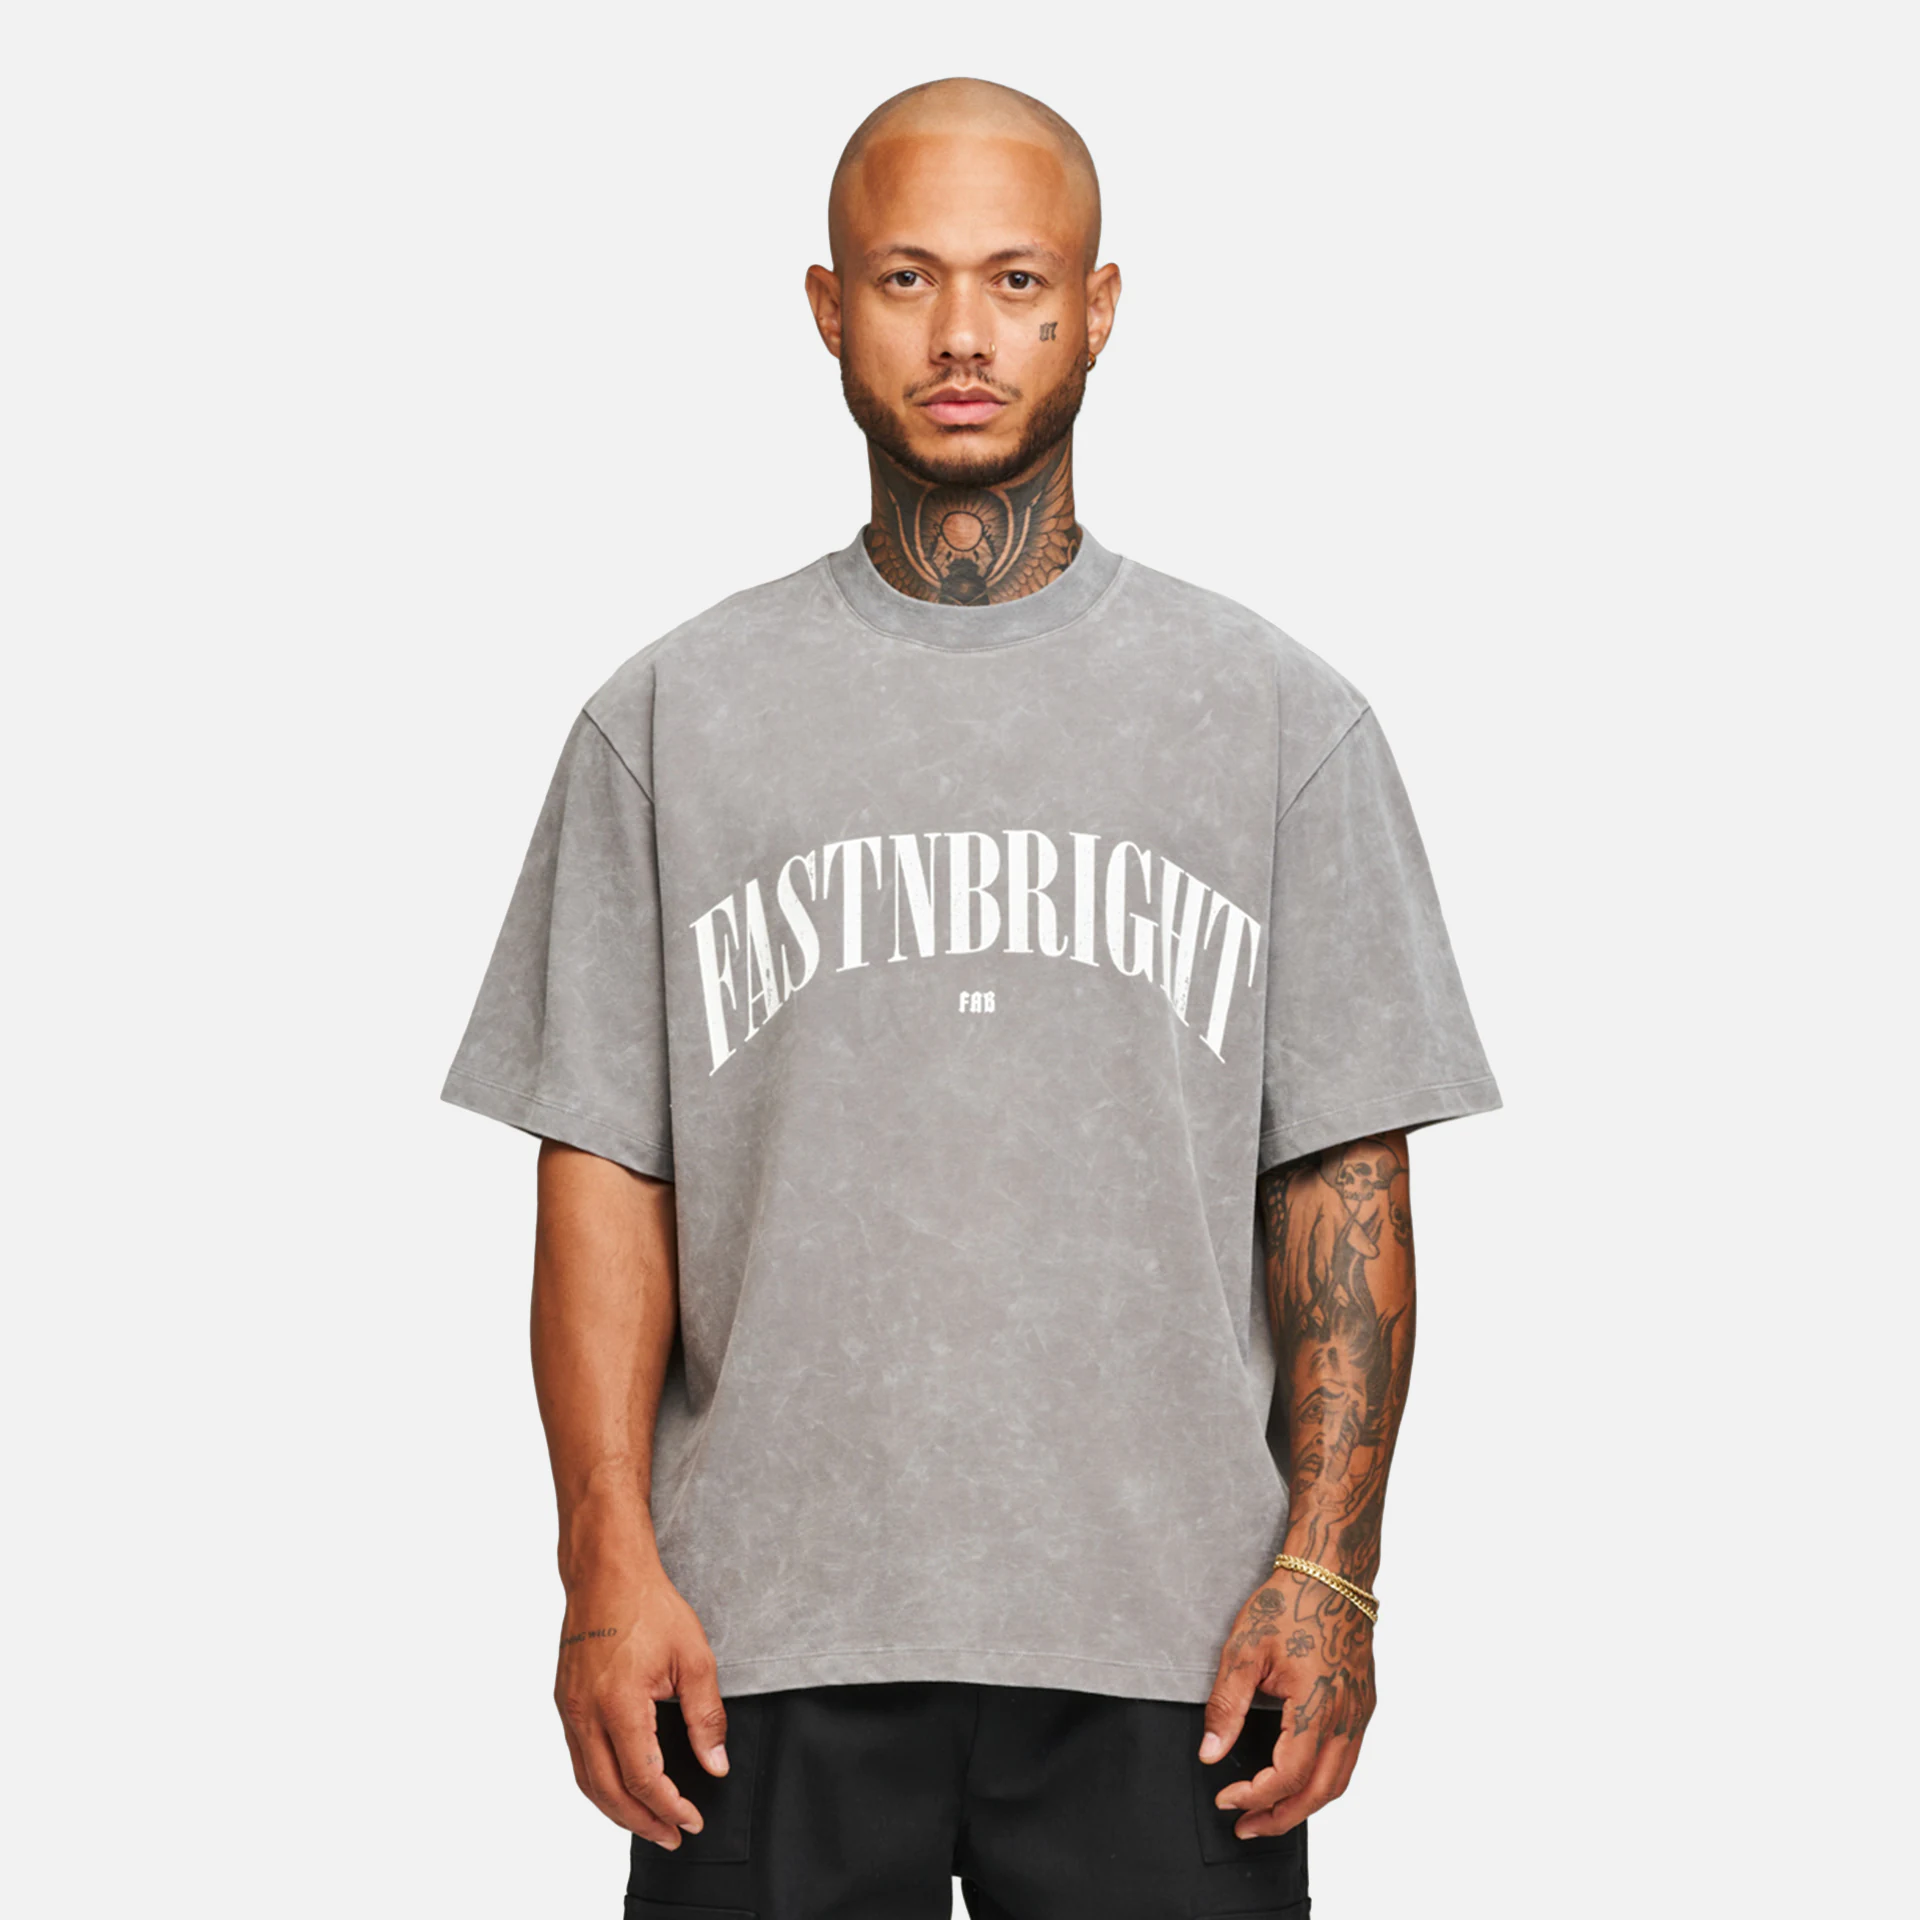 Fast and Bright FAB T-Shirt Washed Grey